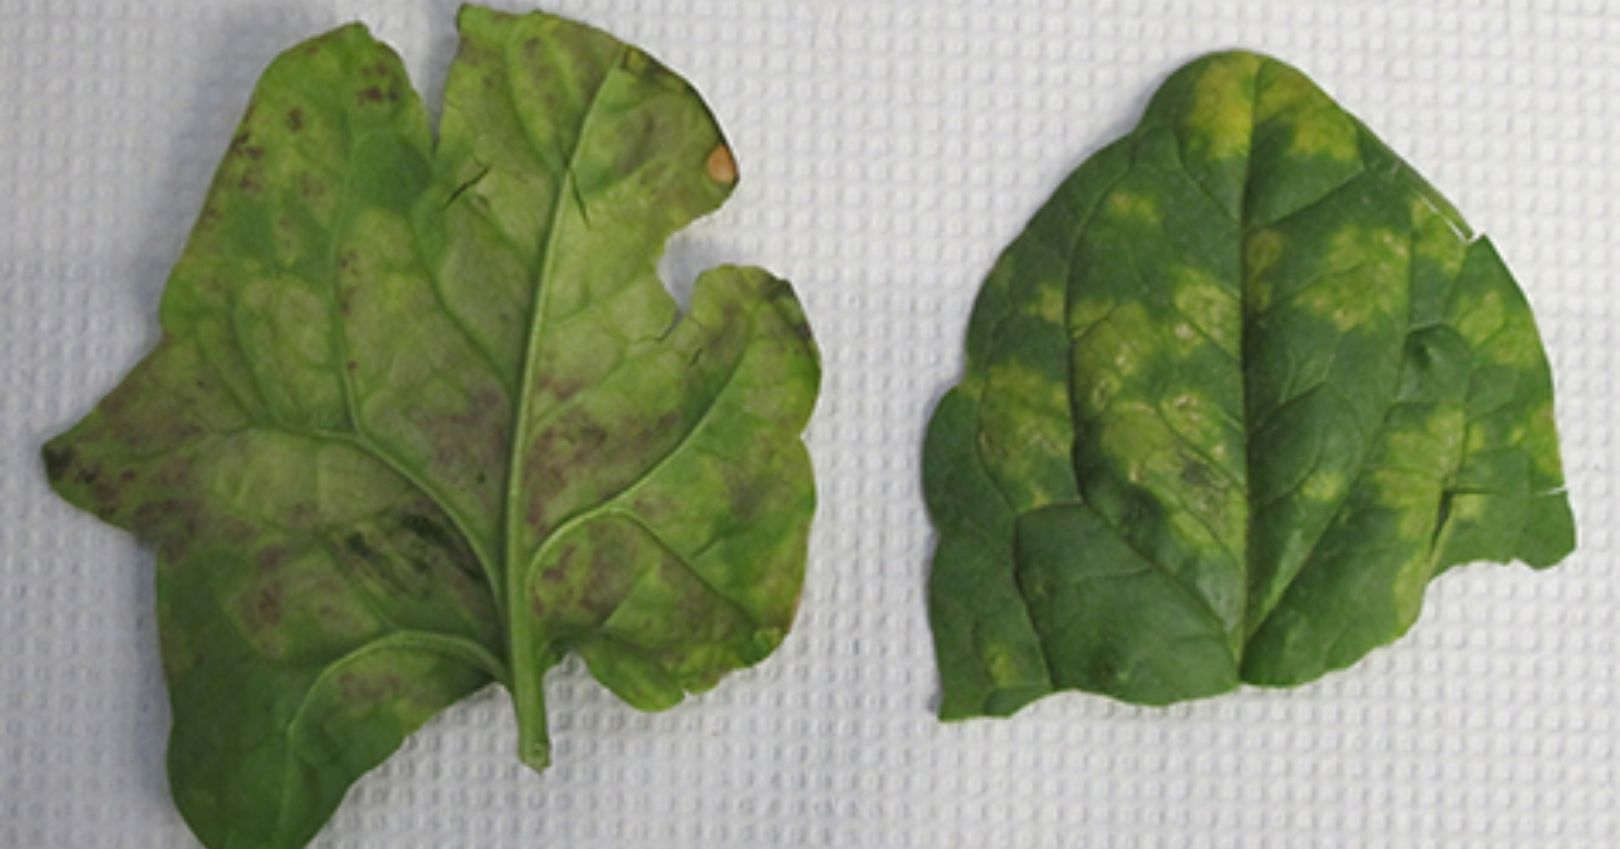 Downy Mildew of Spinach